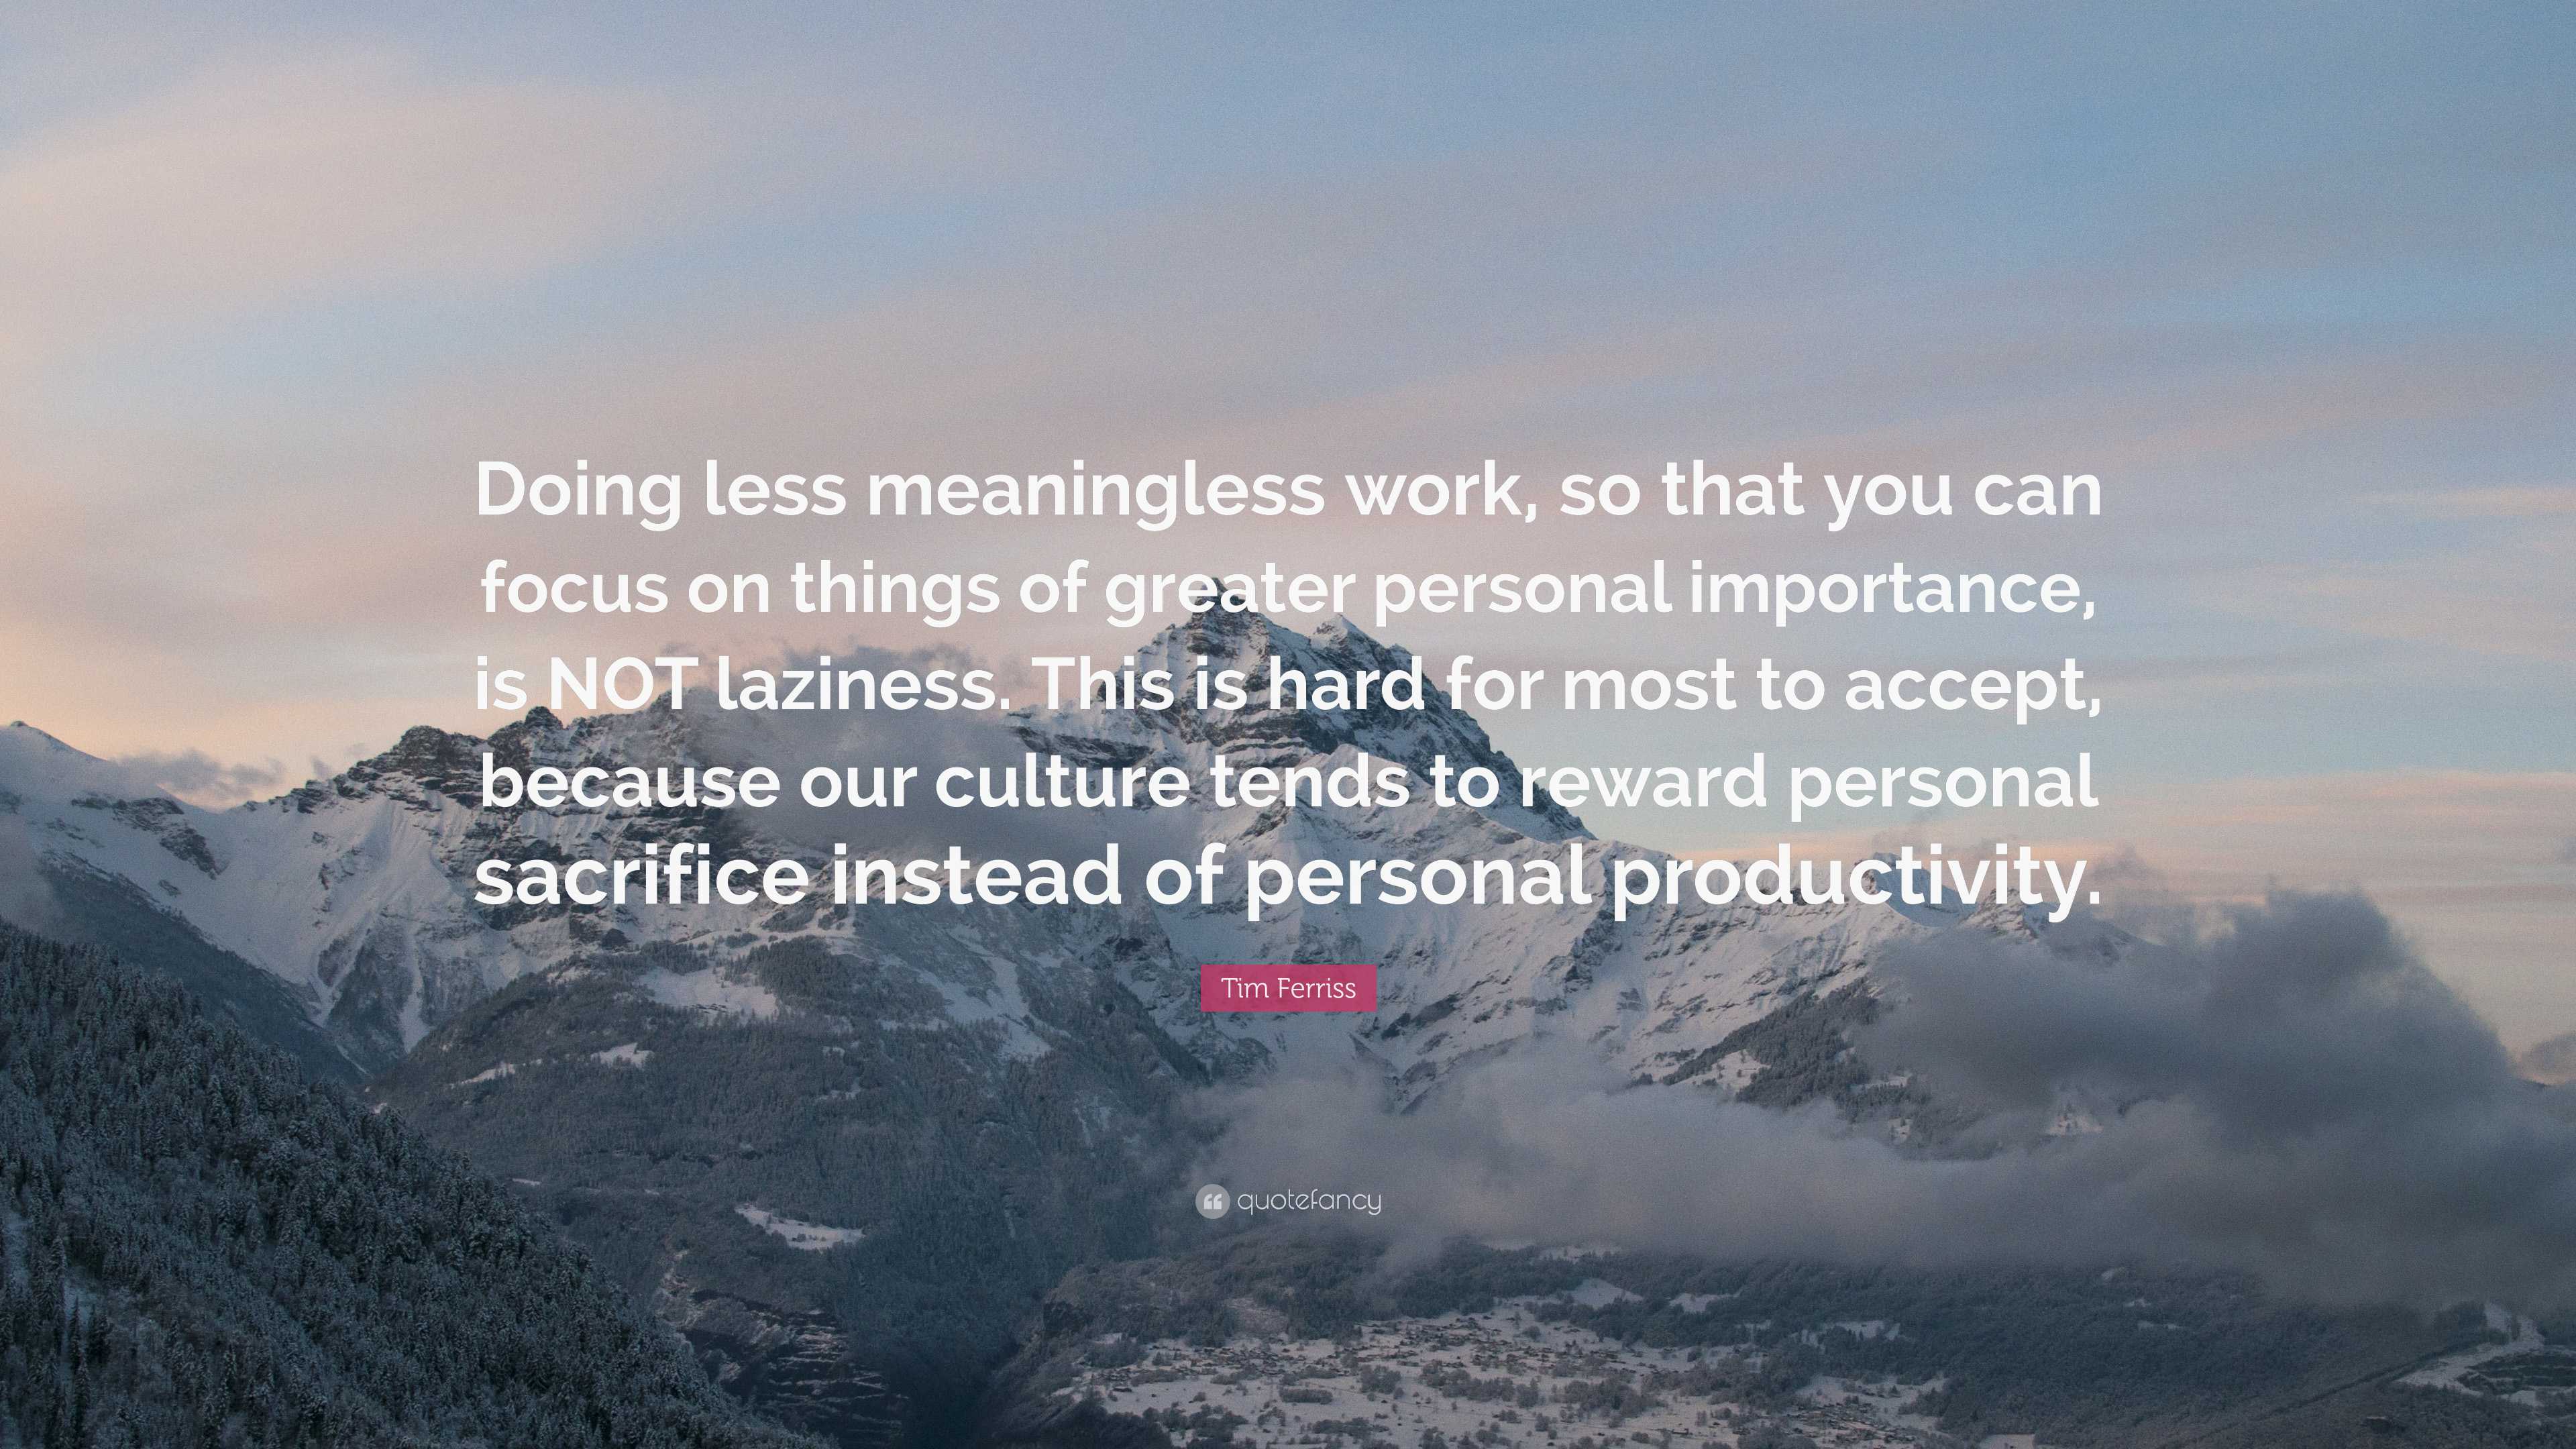 Tim Ferriss Quote: “Doing less meaningless work, so that you can focus ...